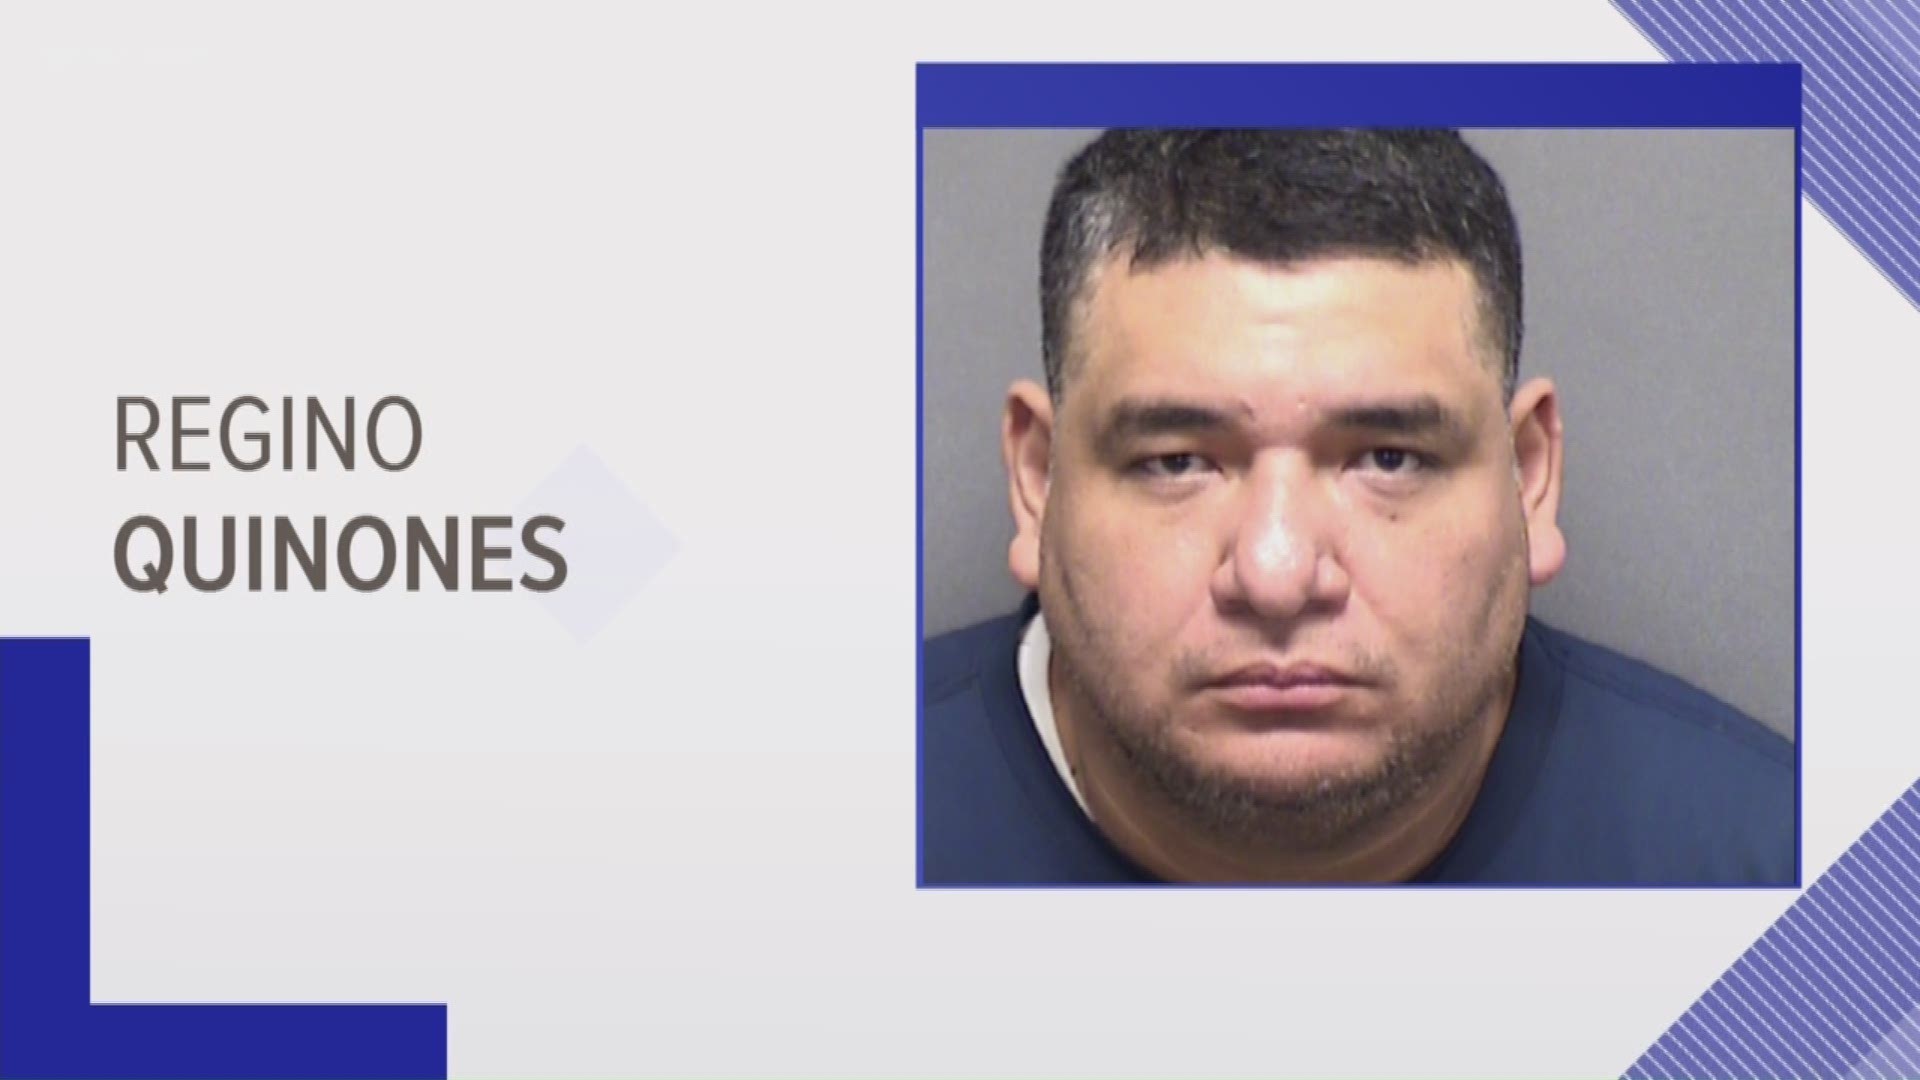 Regino Quinones told detectives he had been abusing three young girls for several years, San Antonio police say.